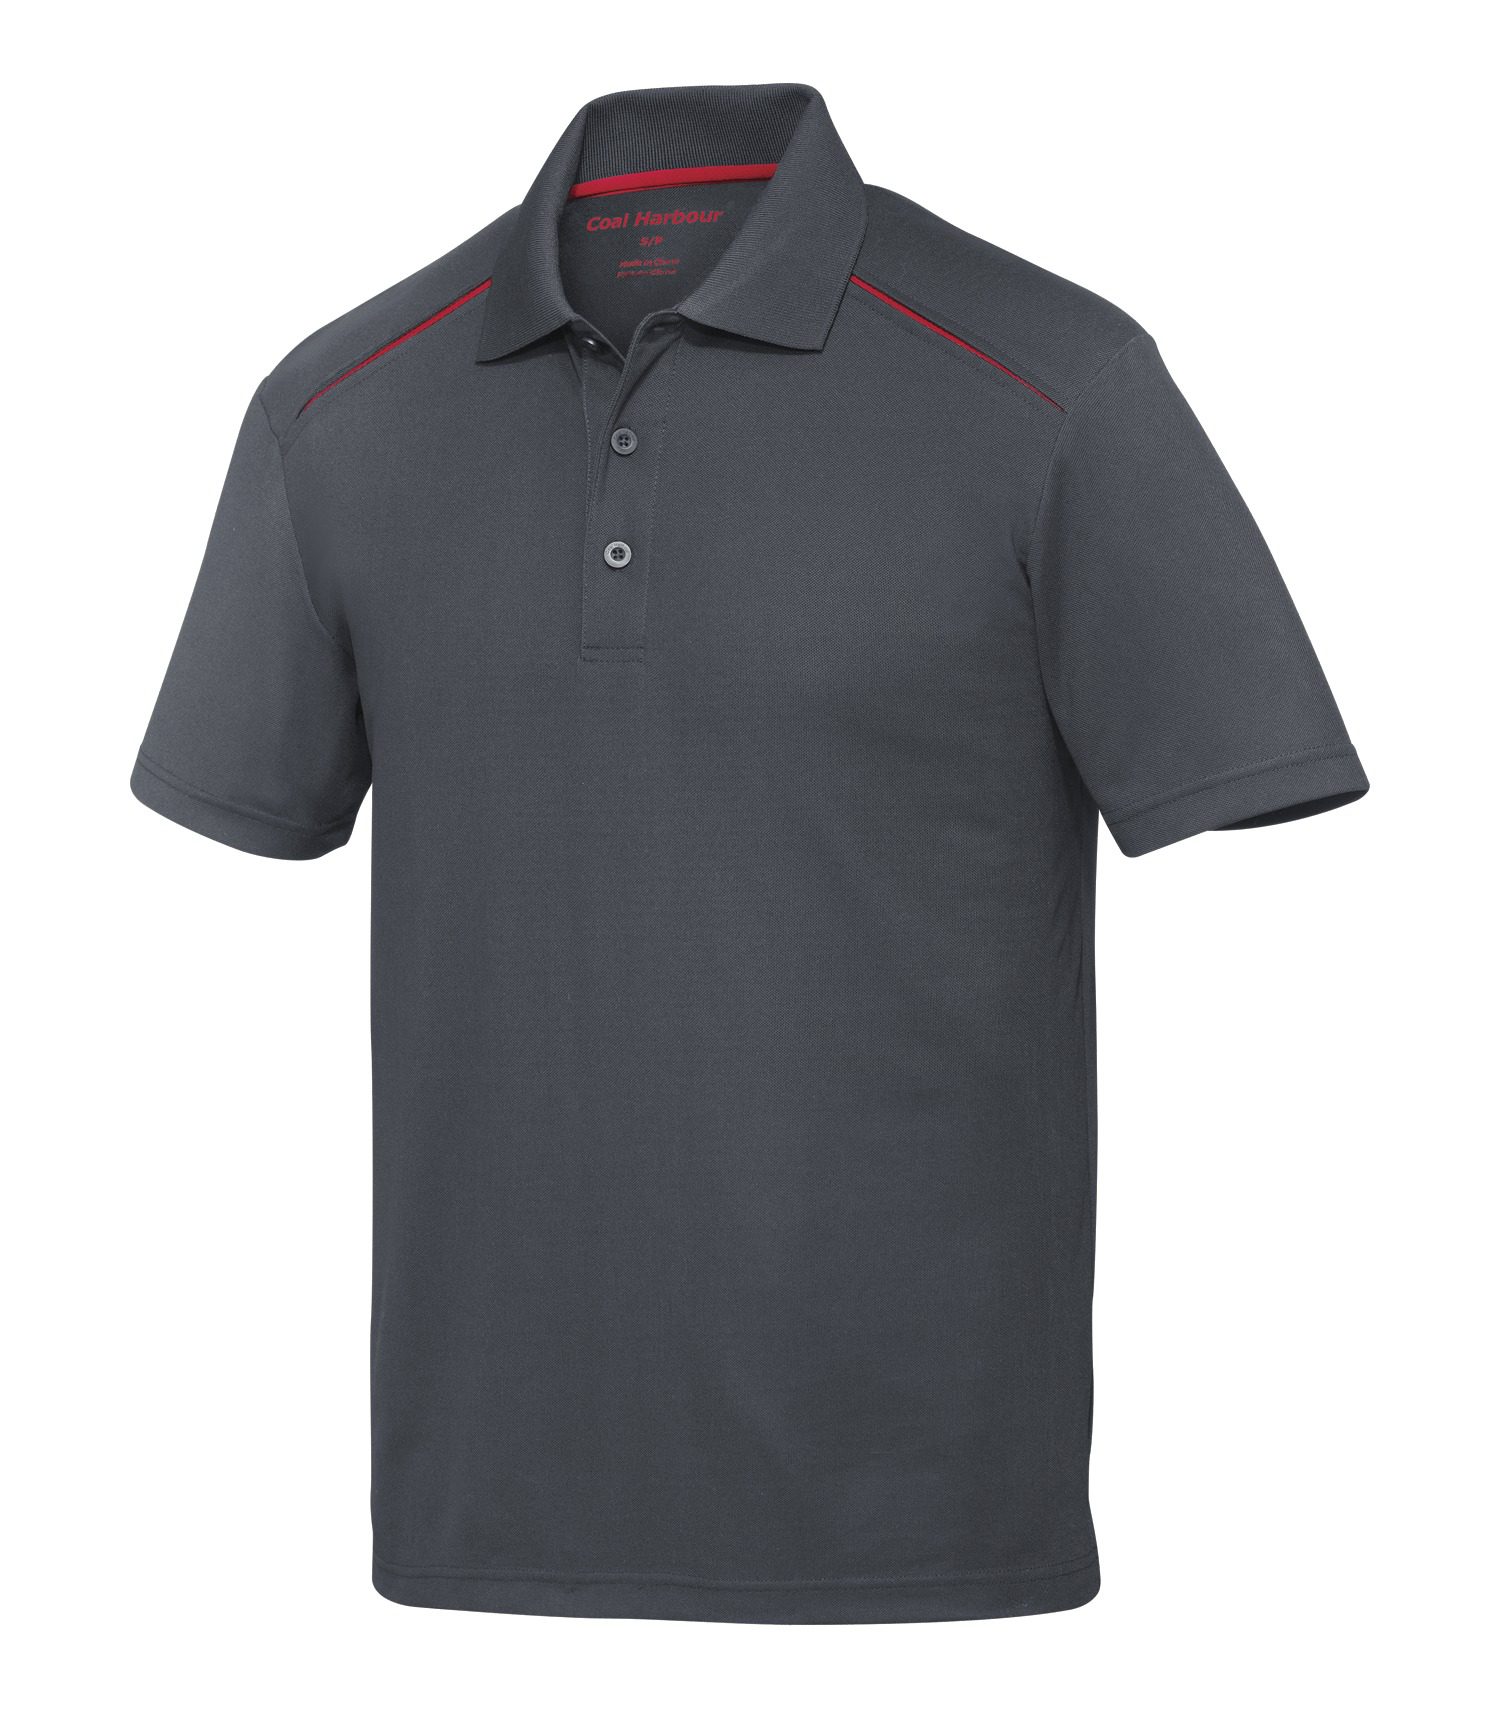 COAL HARBOUR® SNAG RESISTANT CONTRAST INSET SPORT SHIRT #S4002 Iron Grey / Red